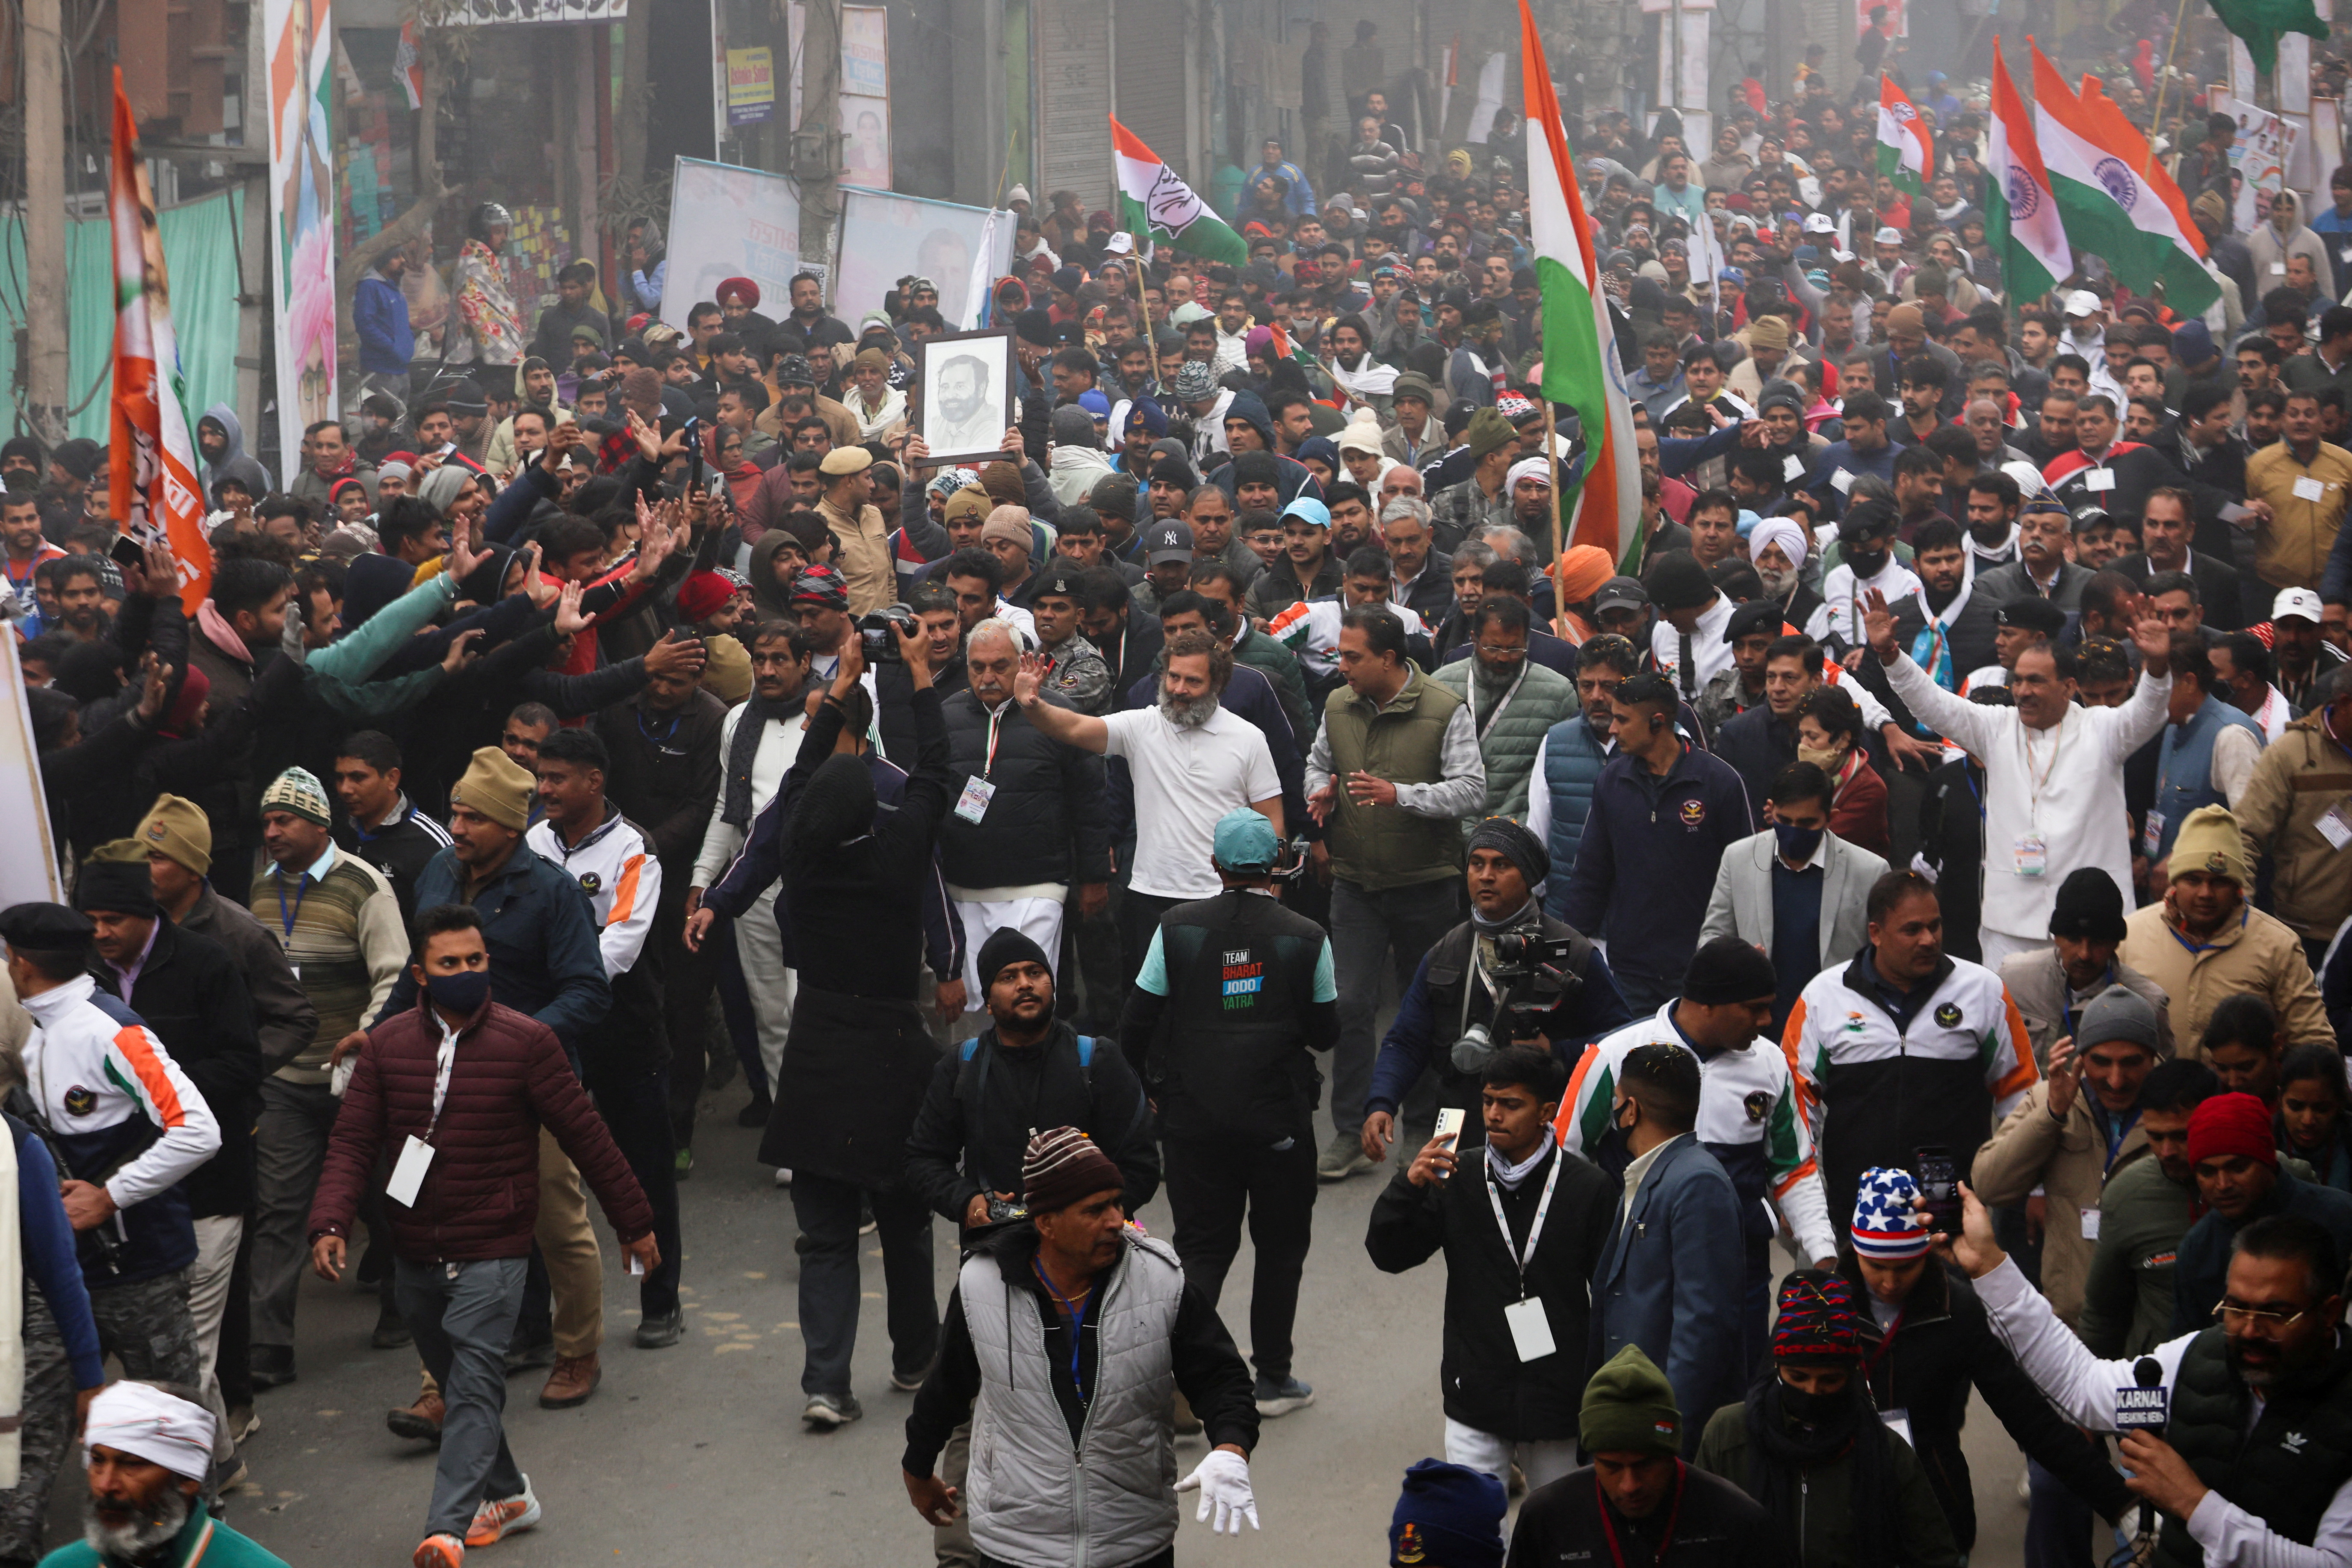 Rahul Gandhi, the leader of India's main opposition Congress party walks along with his supporters in Panipat, India